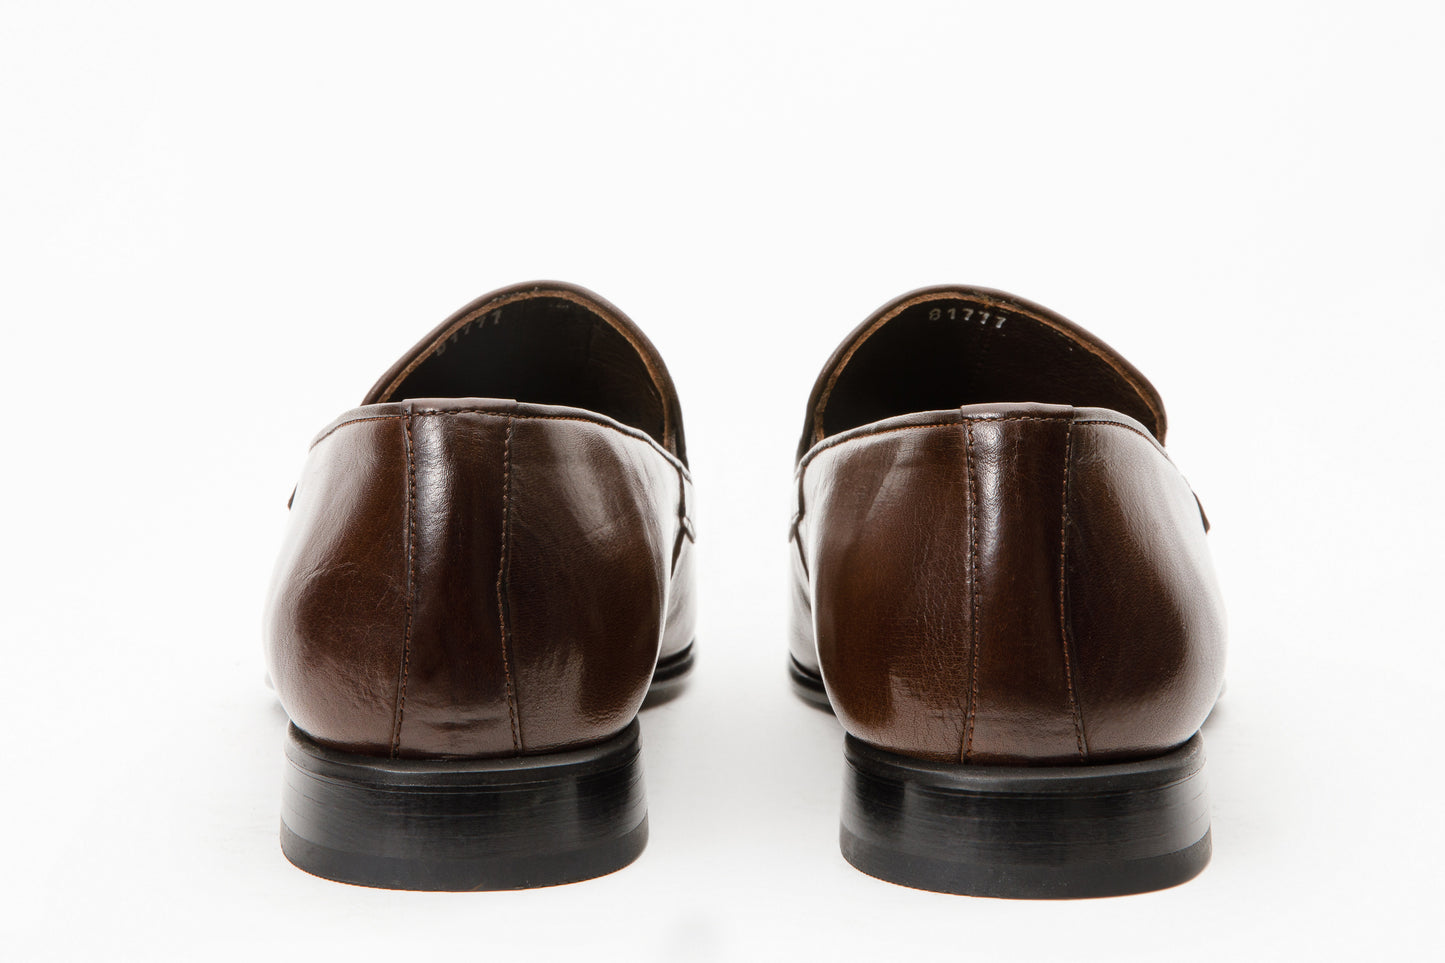 The Pusan Brown Leather Bit Loafer Men Shoe